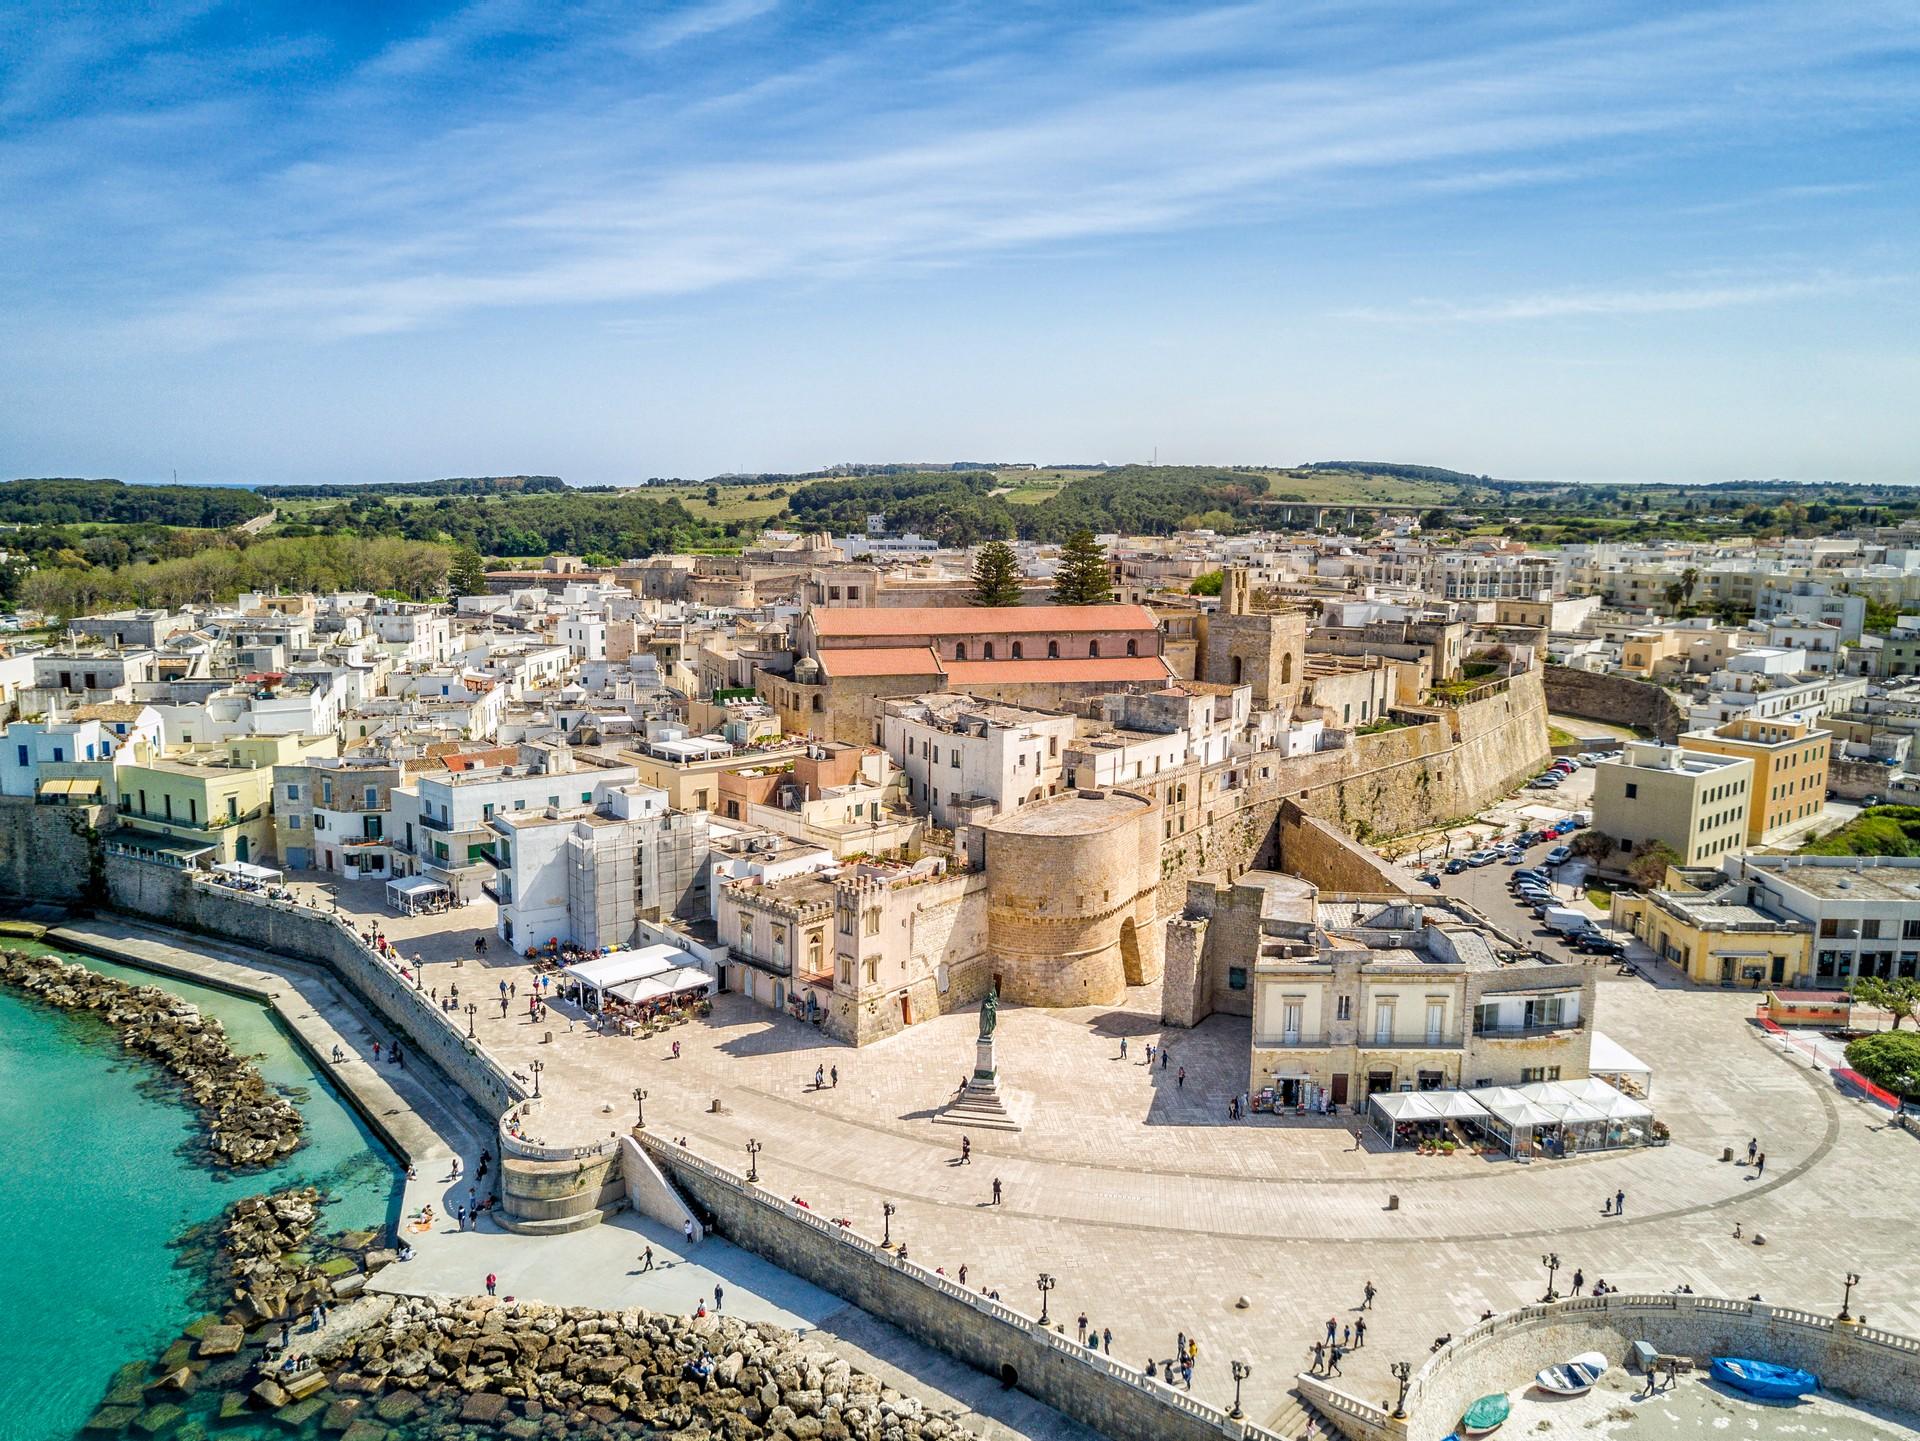 Aerial view of architecture in Otranto in sunny weather with few clouds